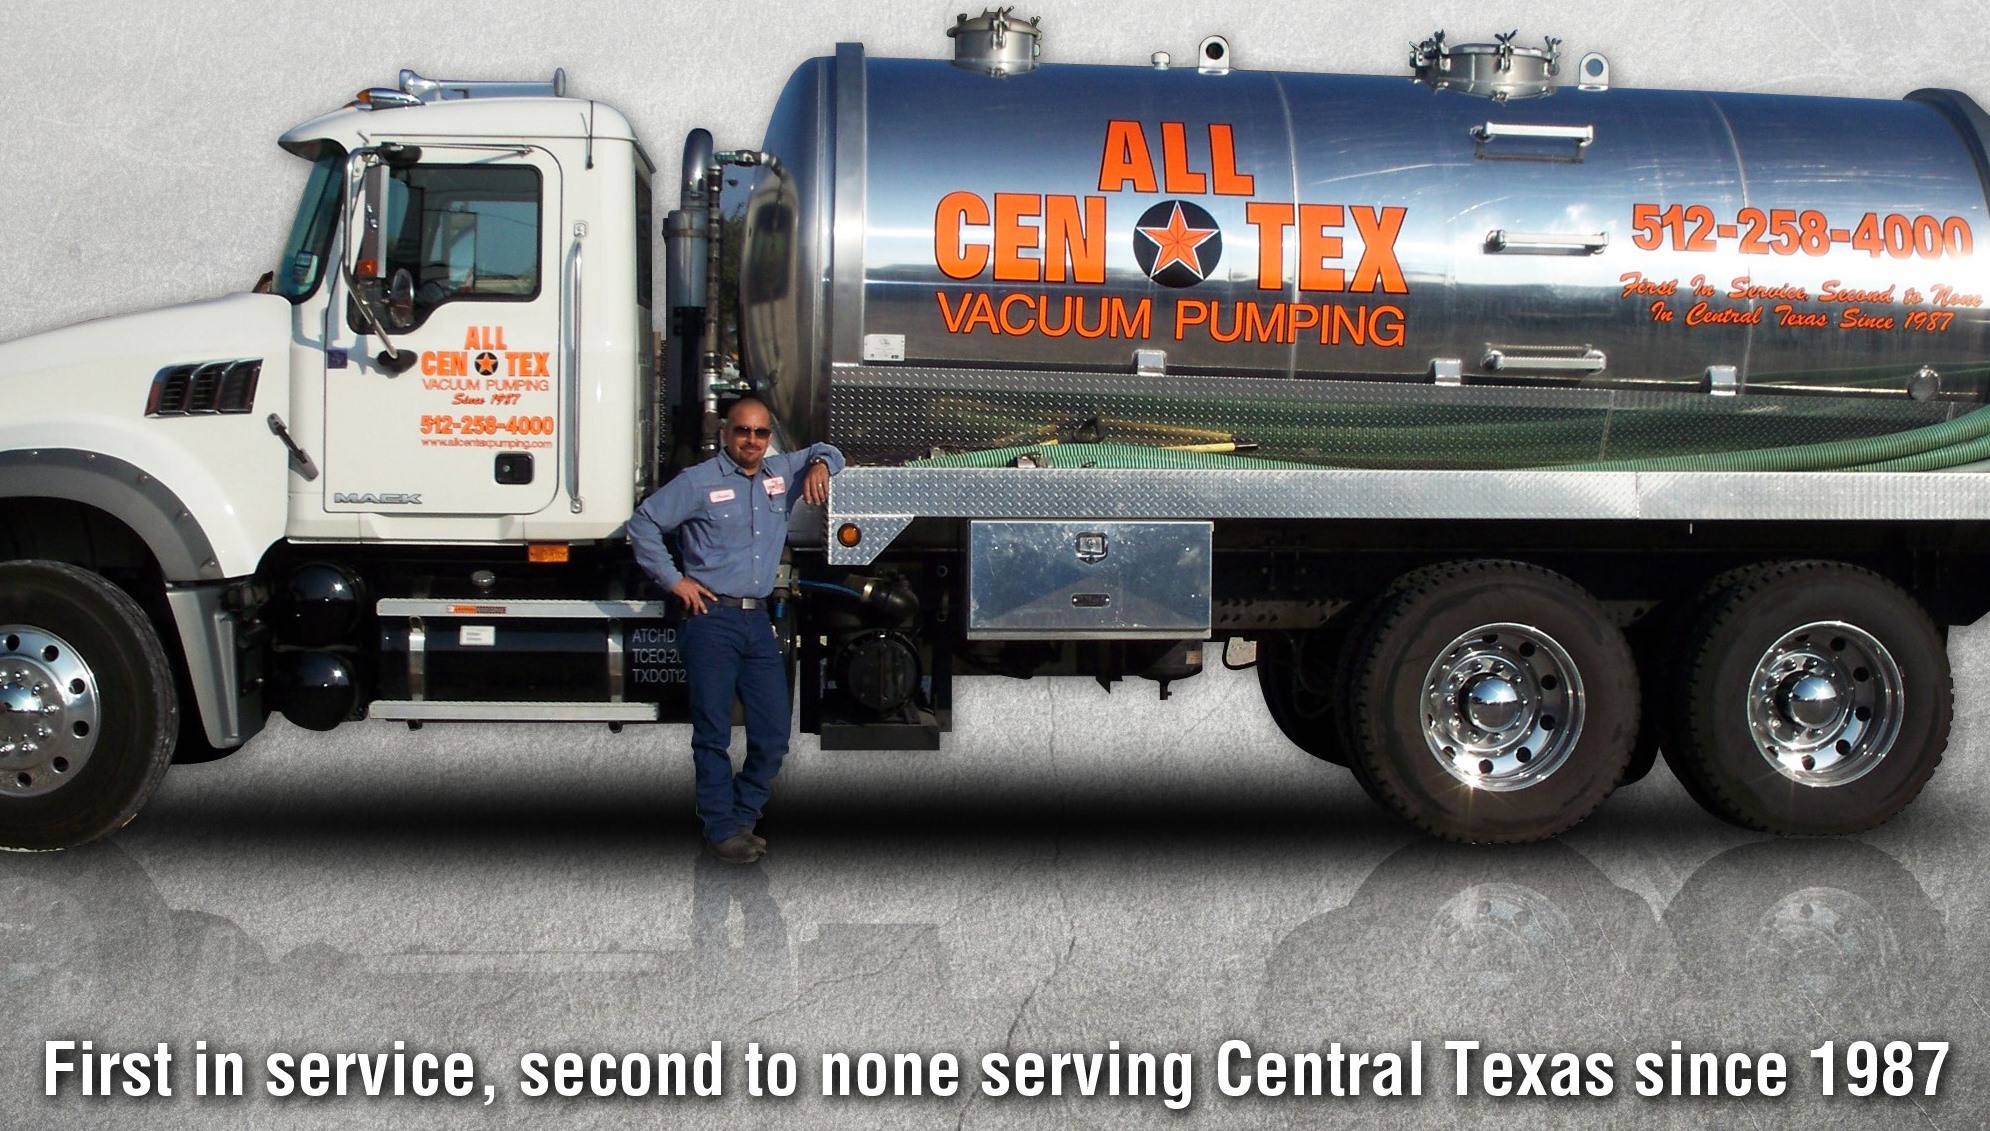 Technician who will come perform septic tank pumping in Pflugerville, TX